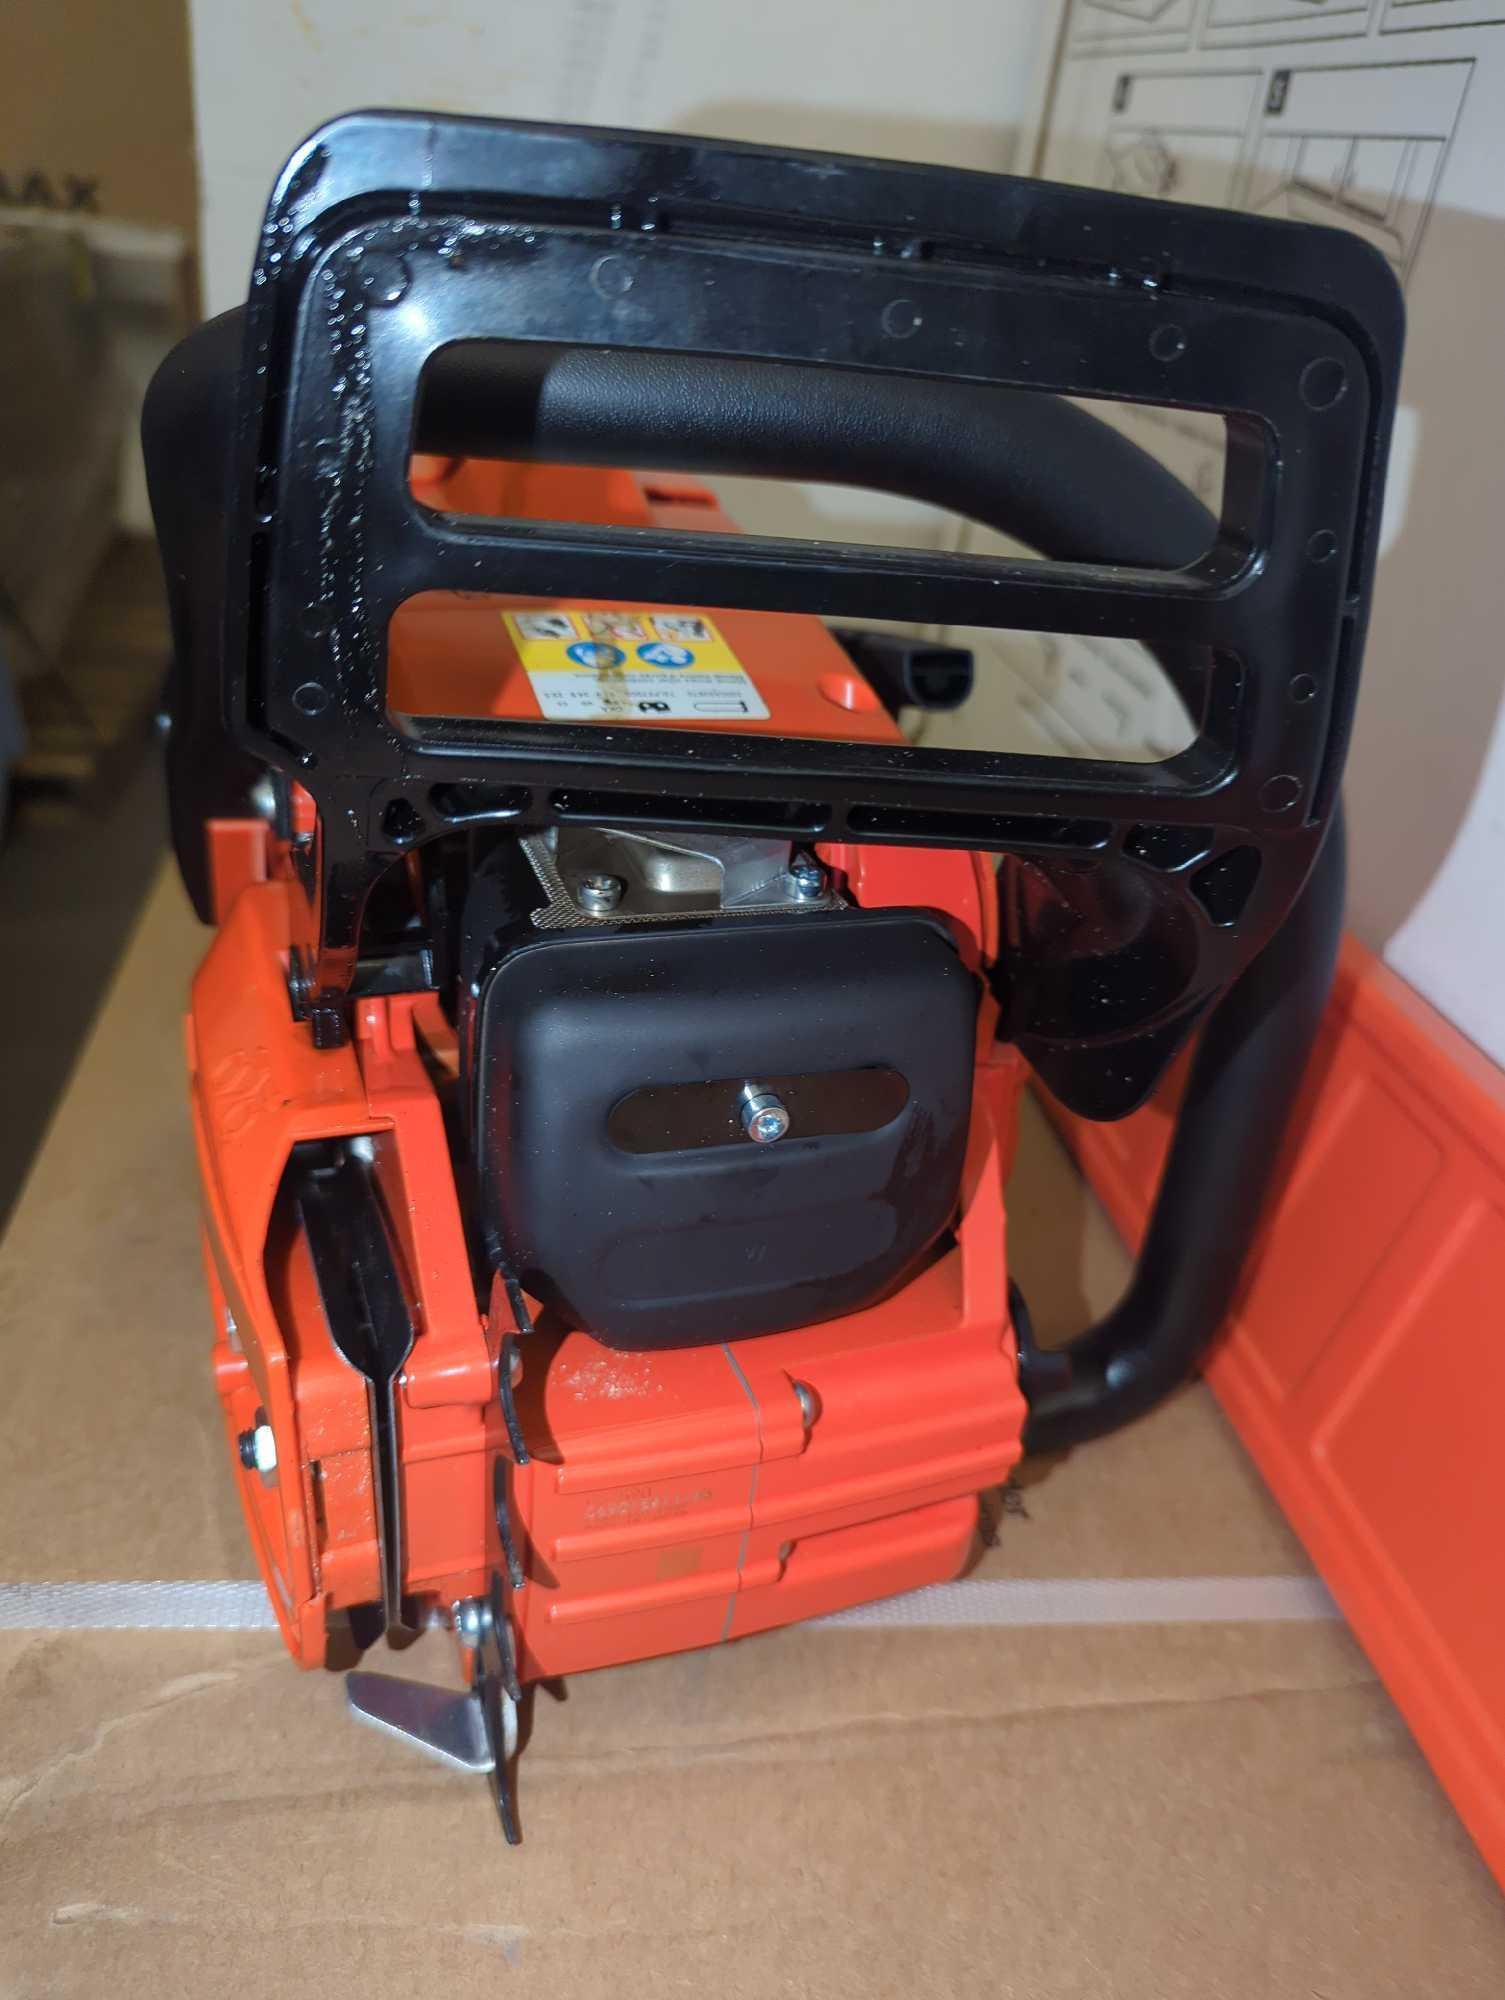 Echo CS-590-24 59.8cc 24" Rear Handle Timber Wolf Chainsaw, Retail Price $460, Appears to be Used,